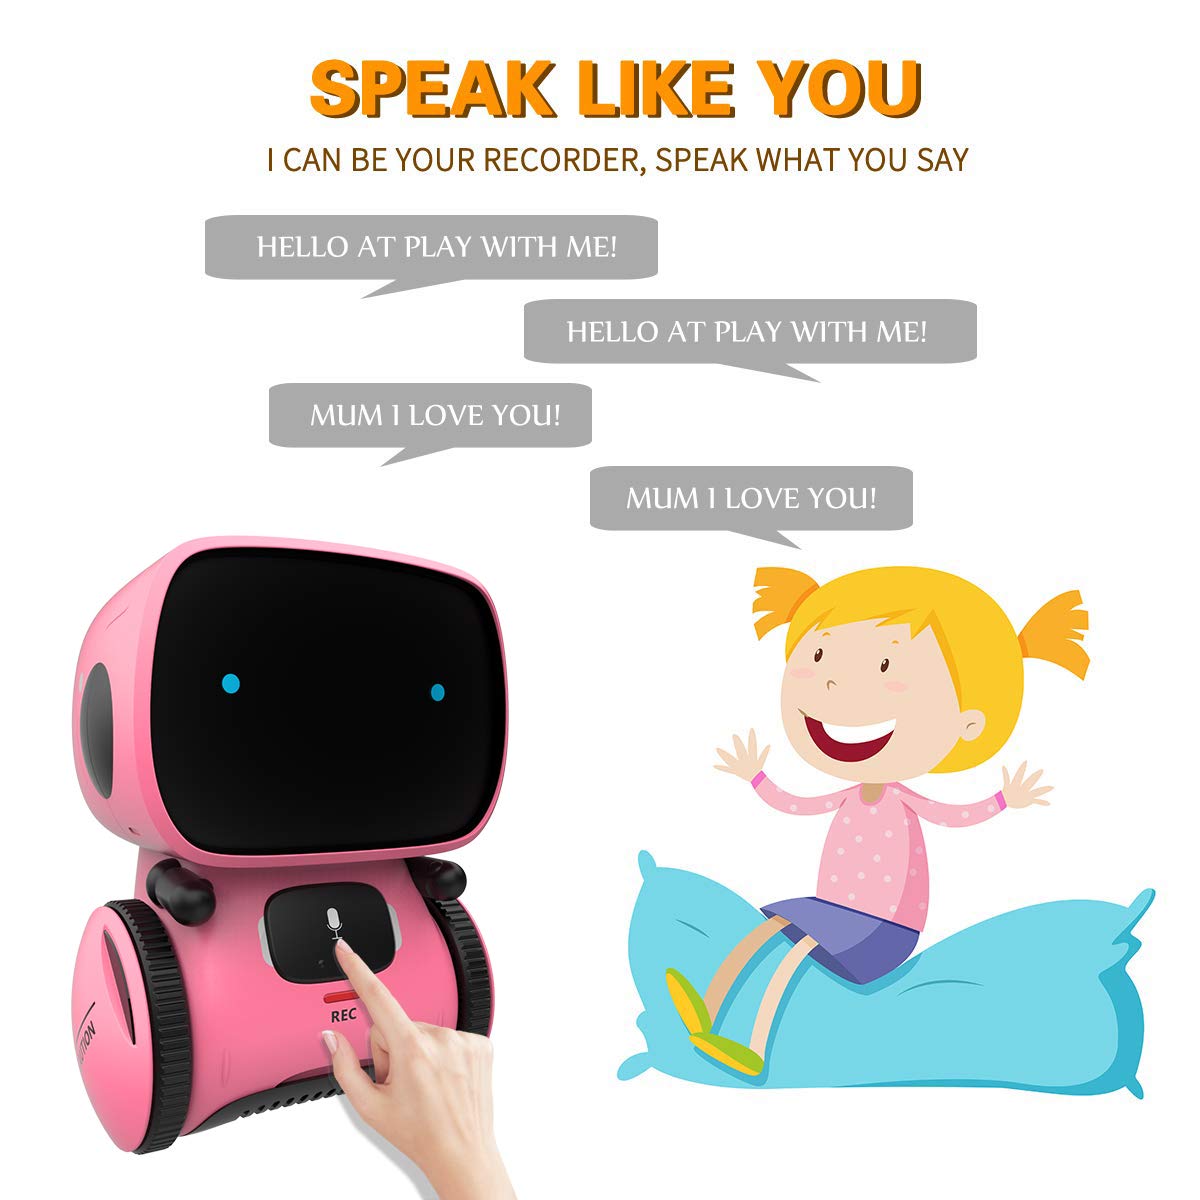 98K Kids Robot Toy, Smart Talking Robots Intelligent Partner and Teacher with Voice Control and Touch Sensor, Singing, Dancing, Repeating, Gift for Boys and Girls of Age 3 and Up